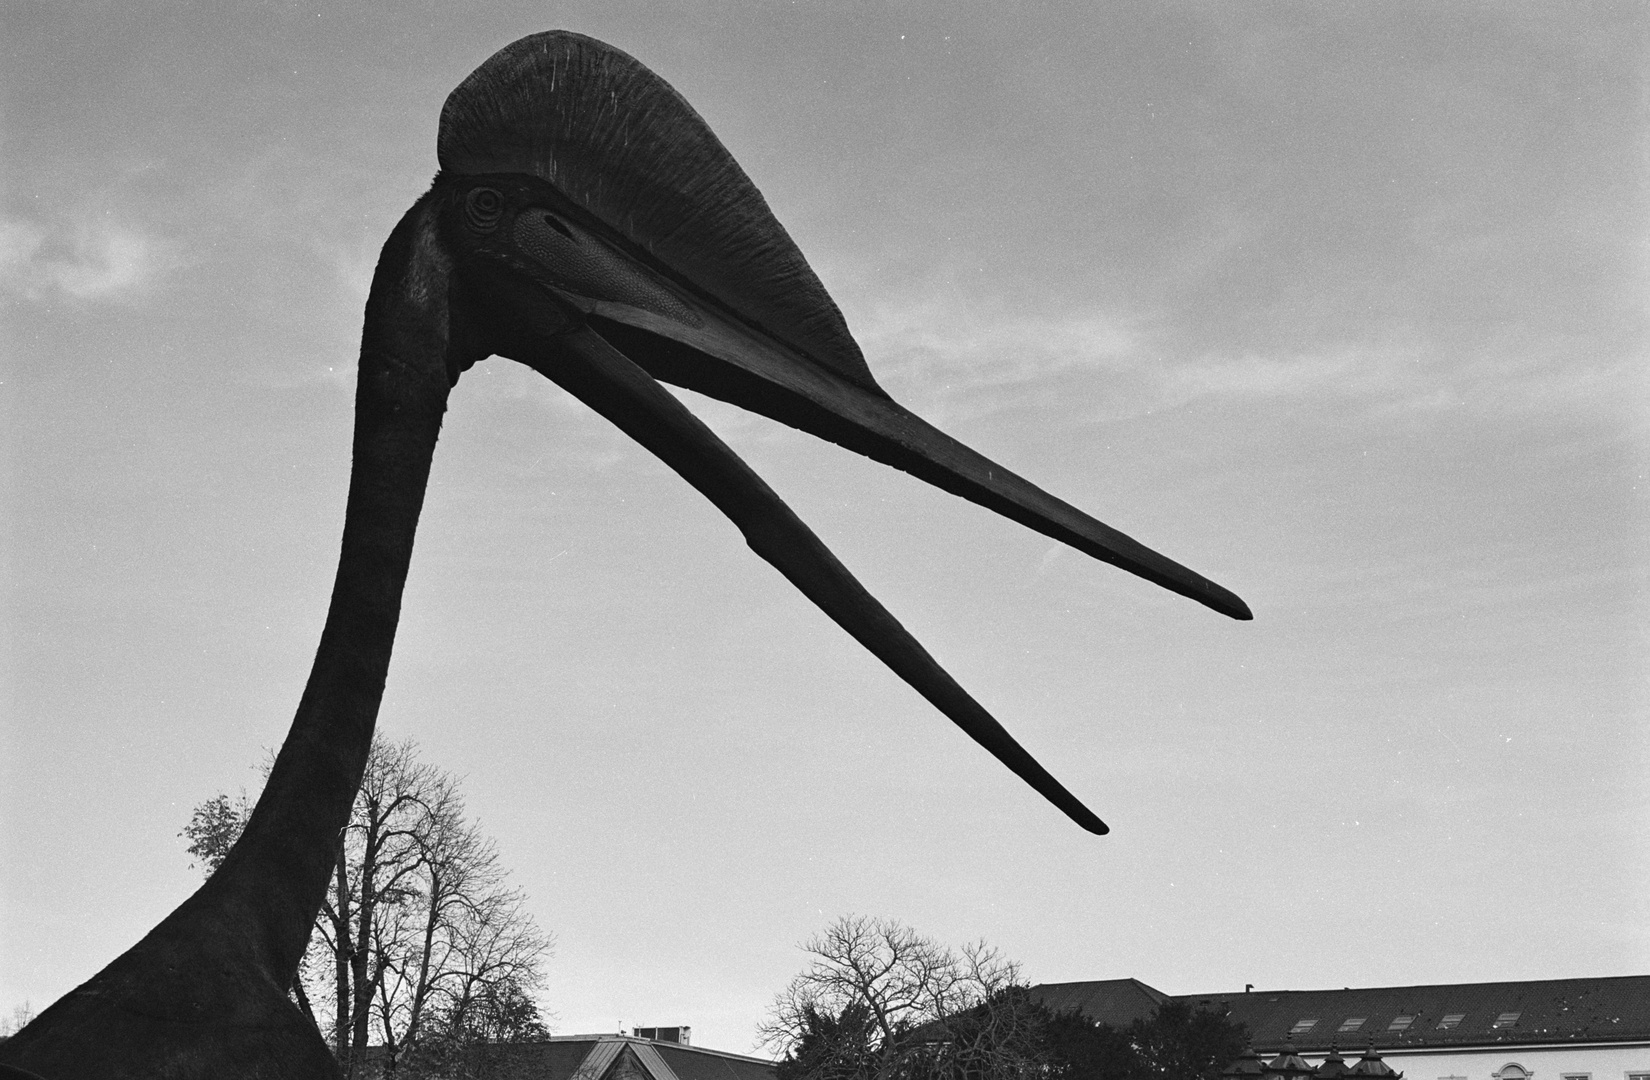 Quetzalcoatlus spotted in front of Karlsruhe Natural History Museum